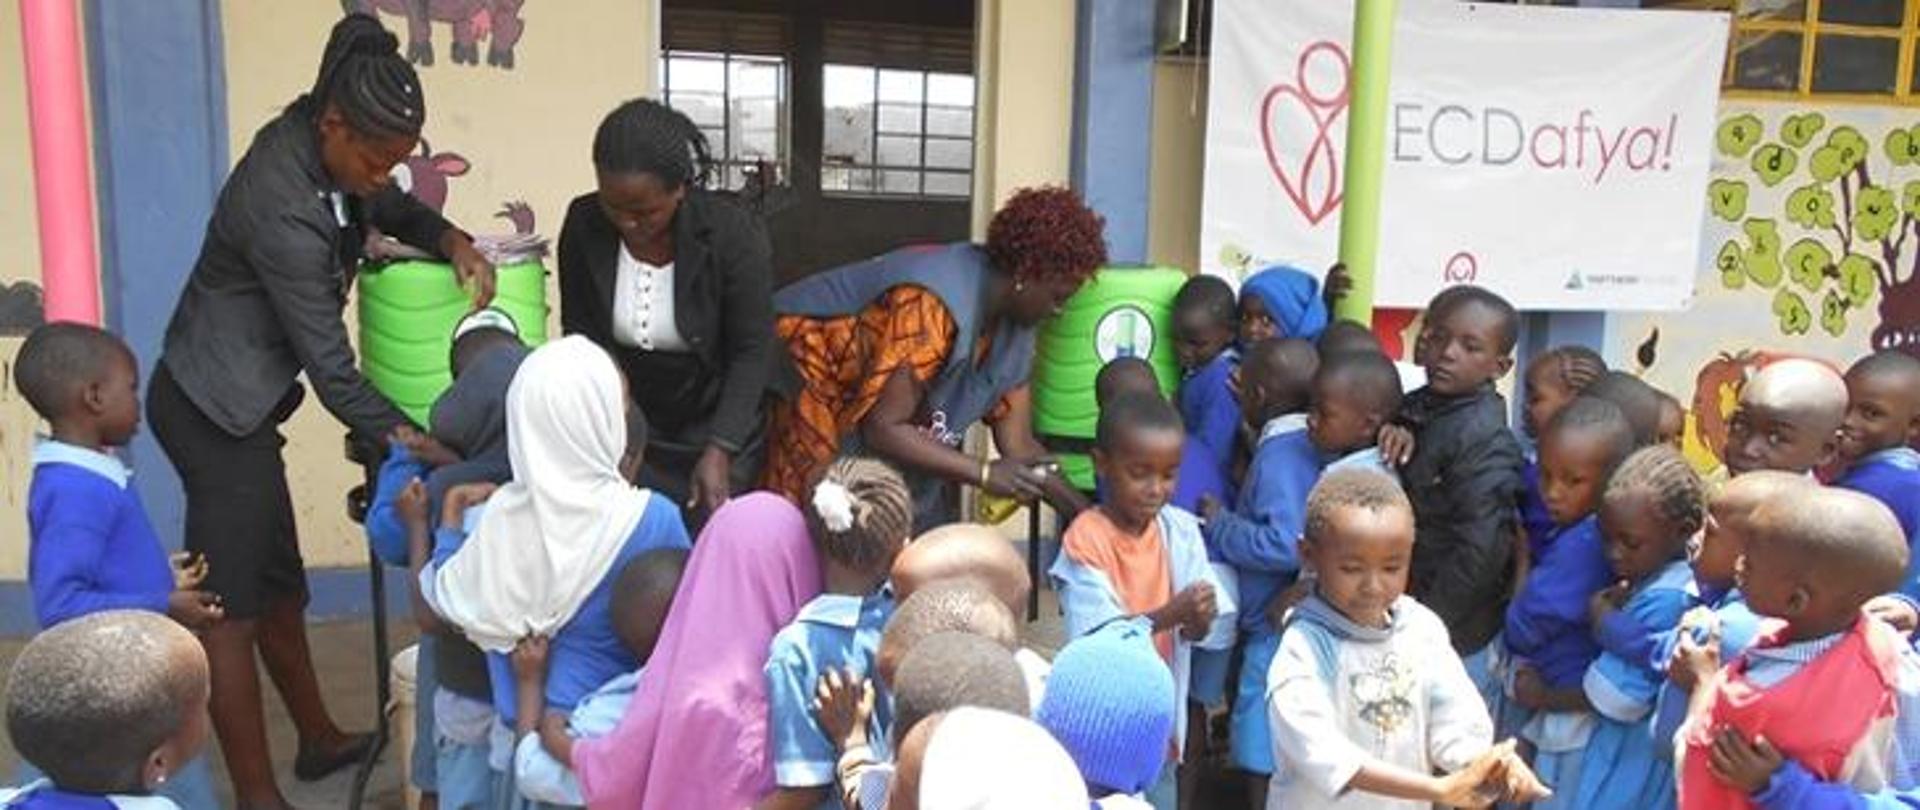 School for all – improving educational and life opportunities of children with disabilities in the rural semi-arid areas of the Mbita Constituency